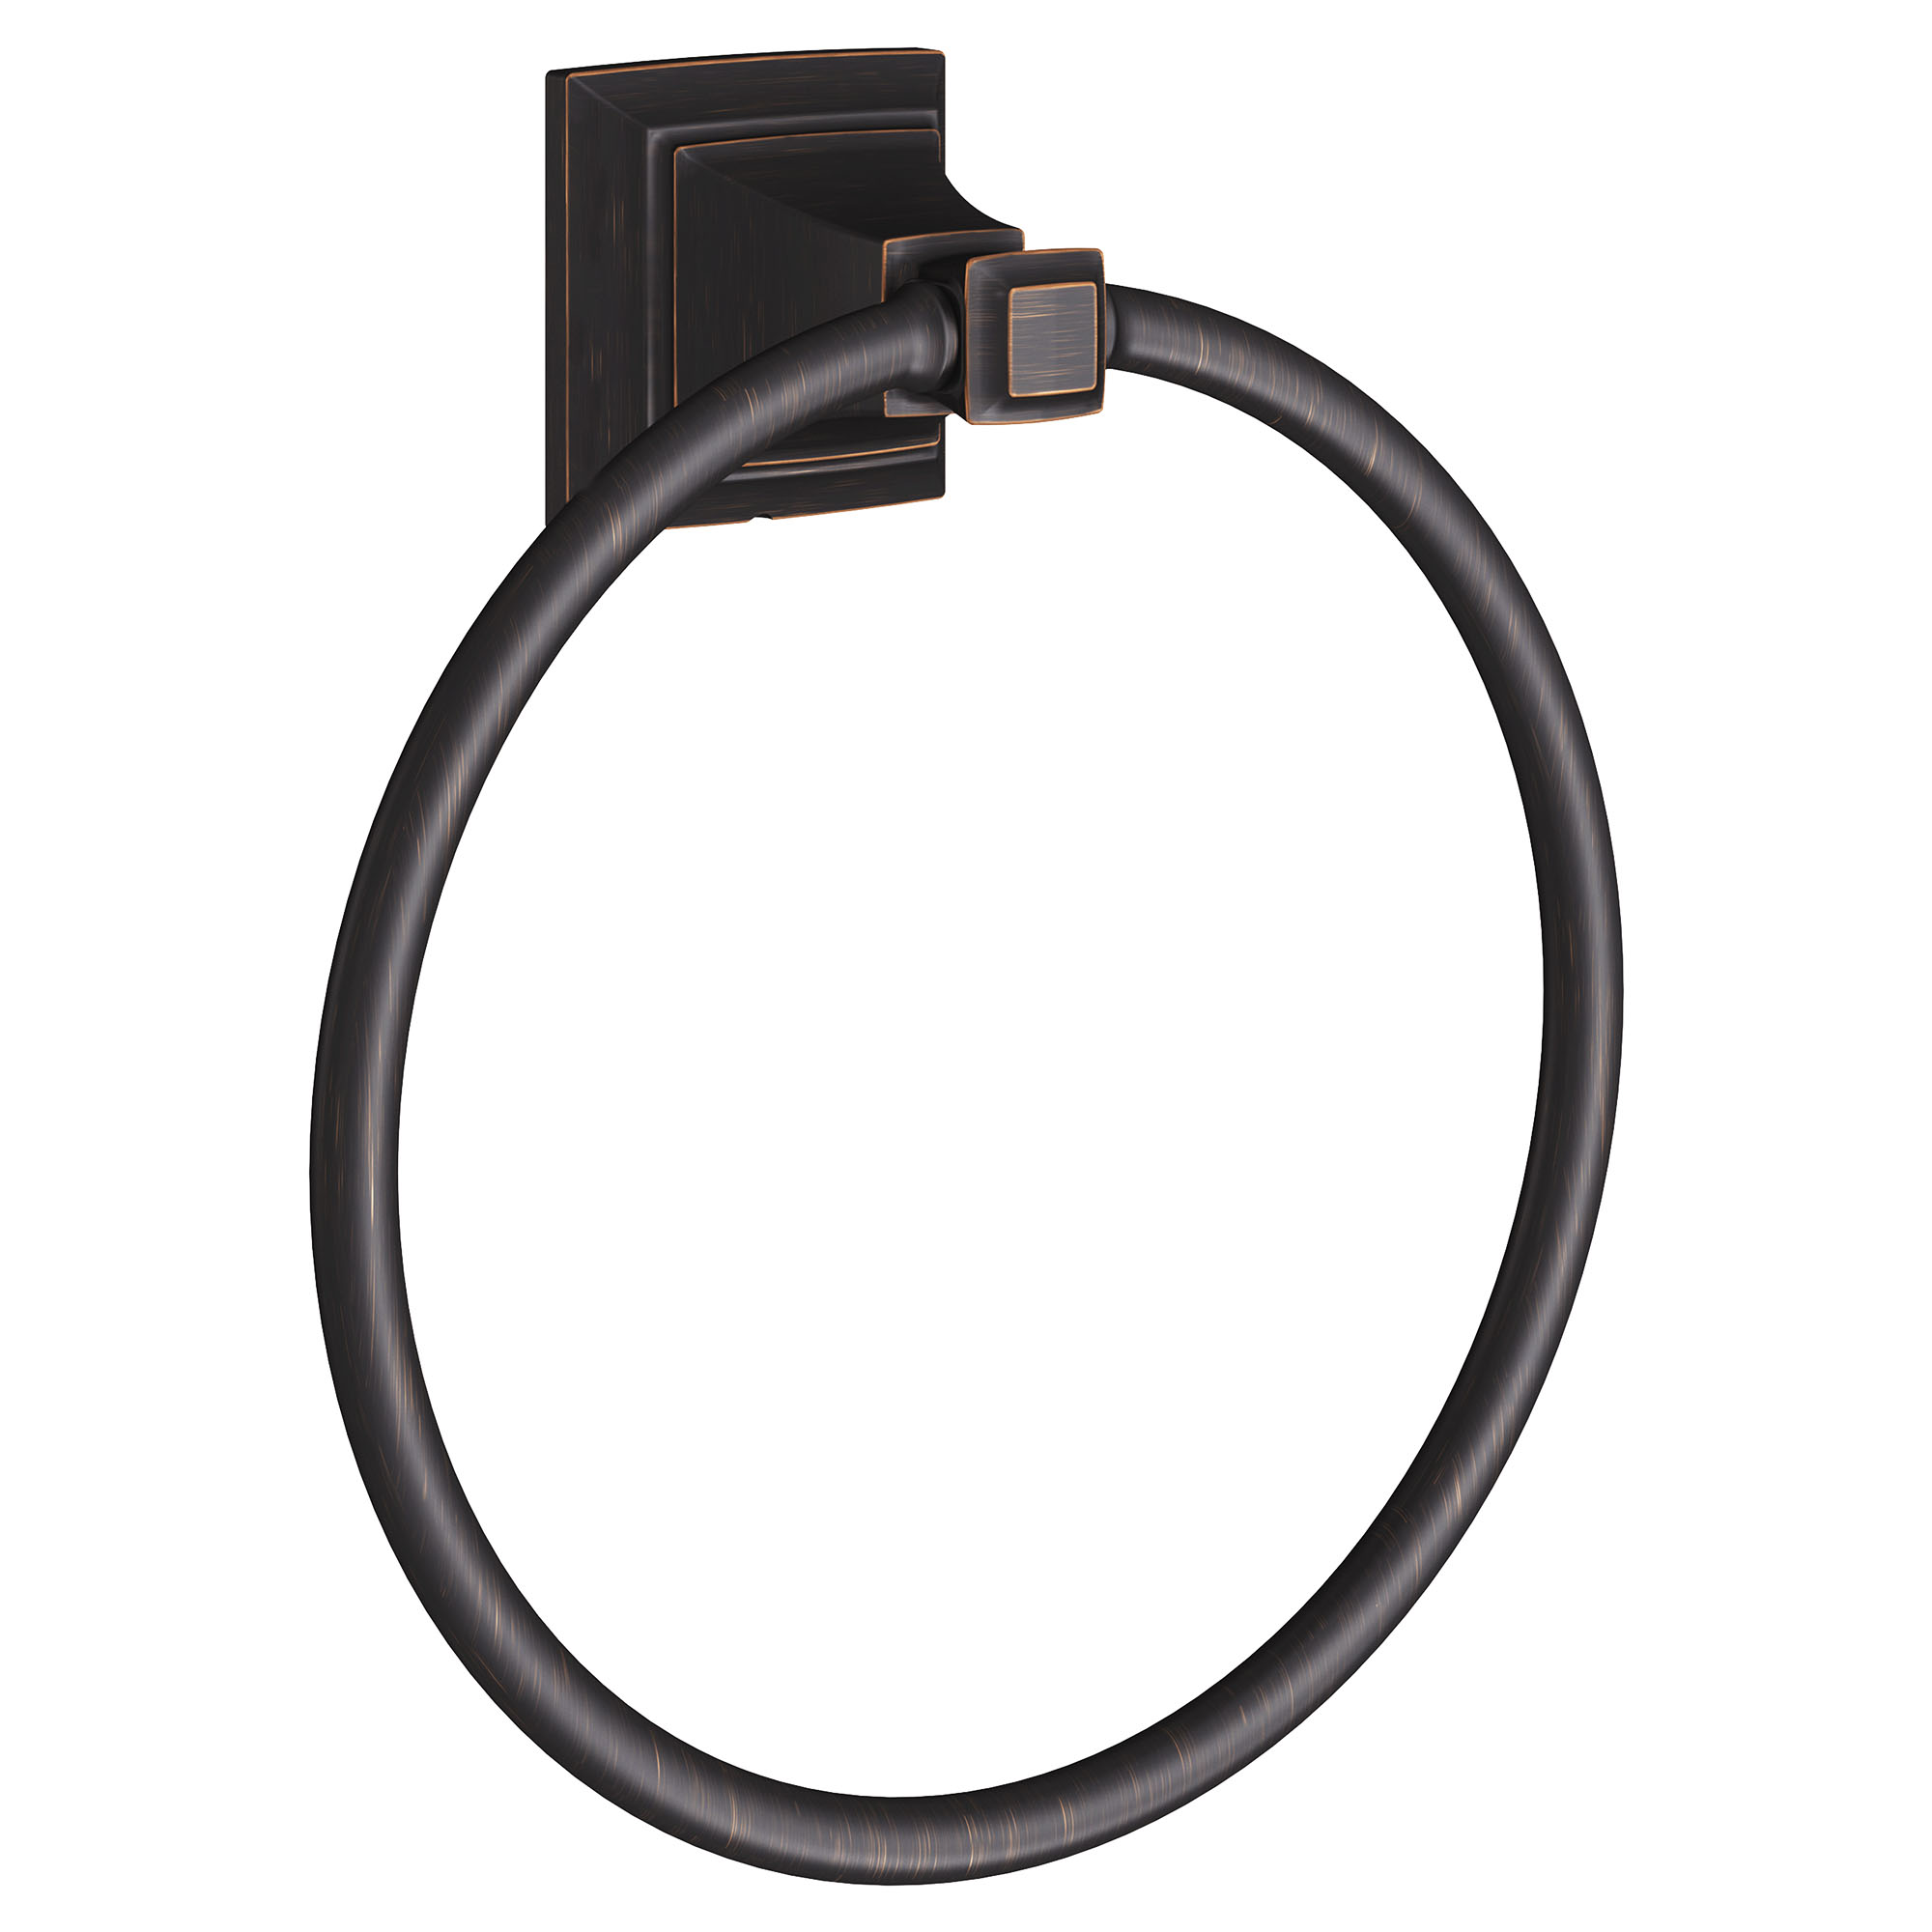 Town Square® S Towel Ring